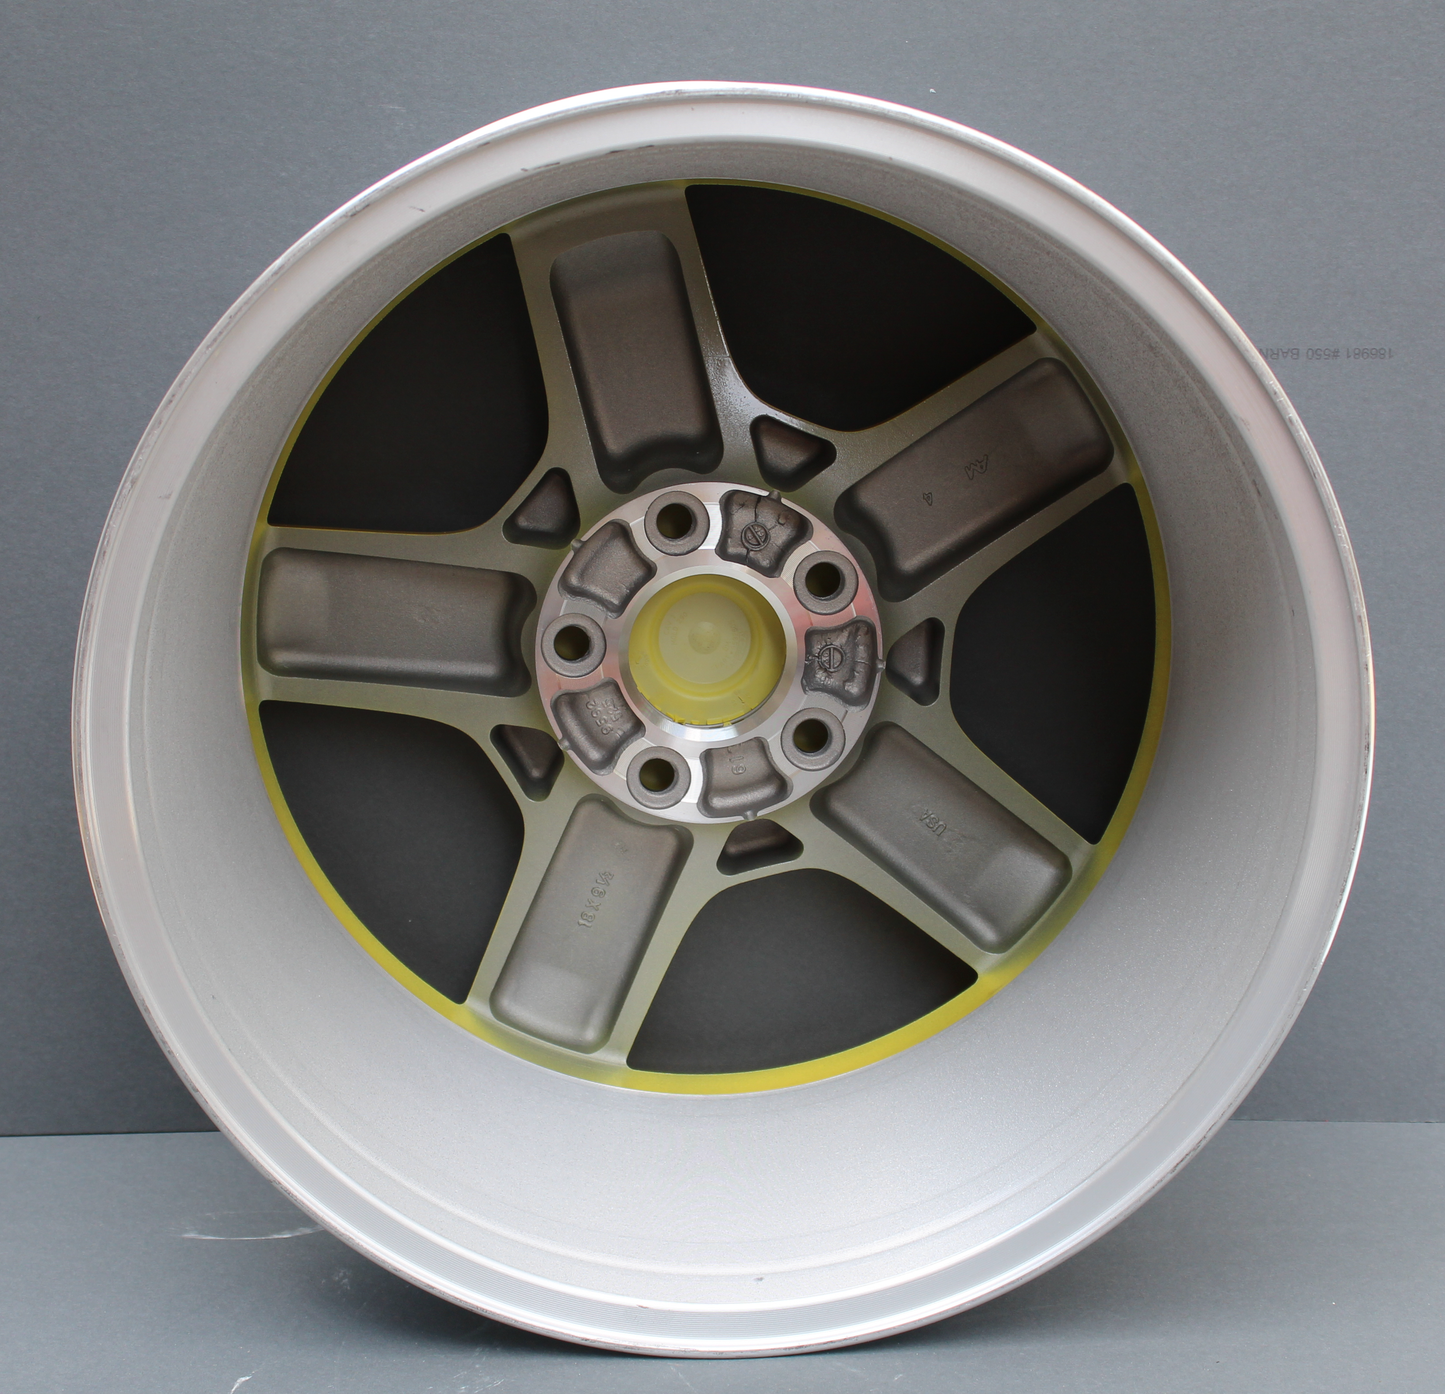 1998 CORVETTE PACE CAR WHEEL. NEW YELLOW, NEW GM PART #9593286 WITH CENTER CAP